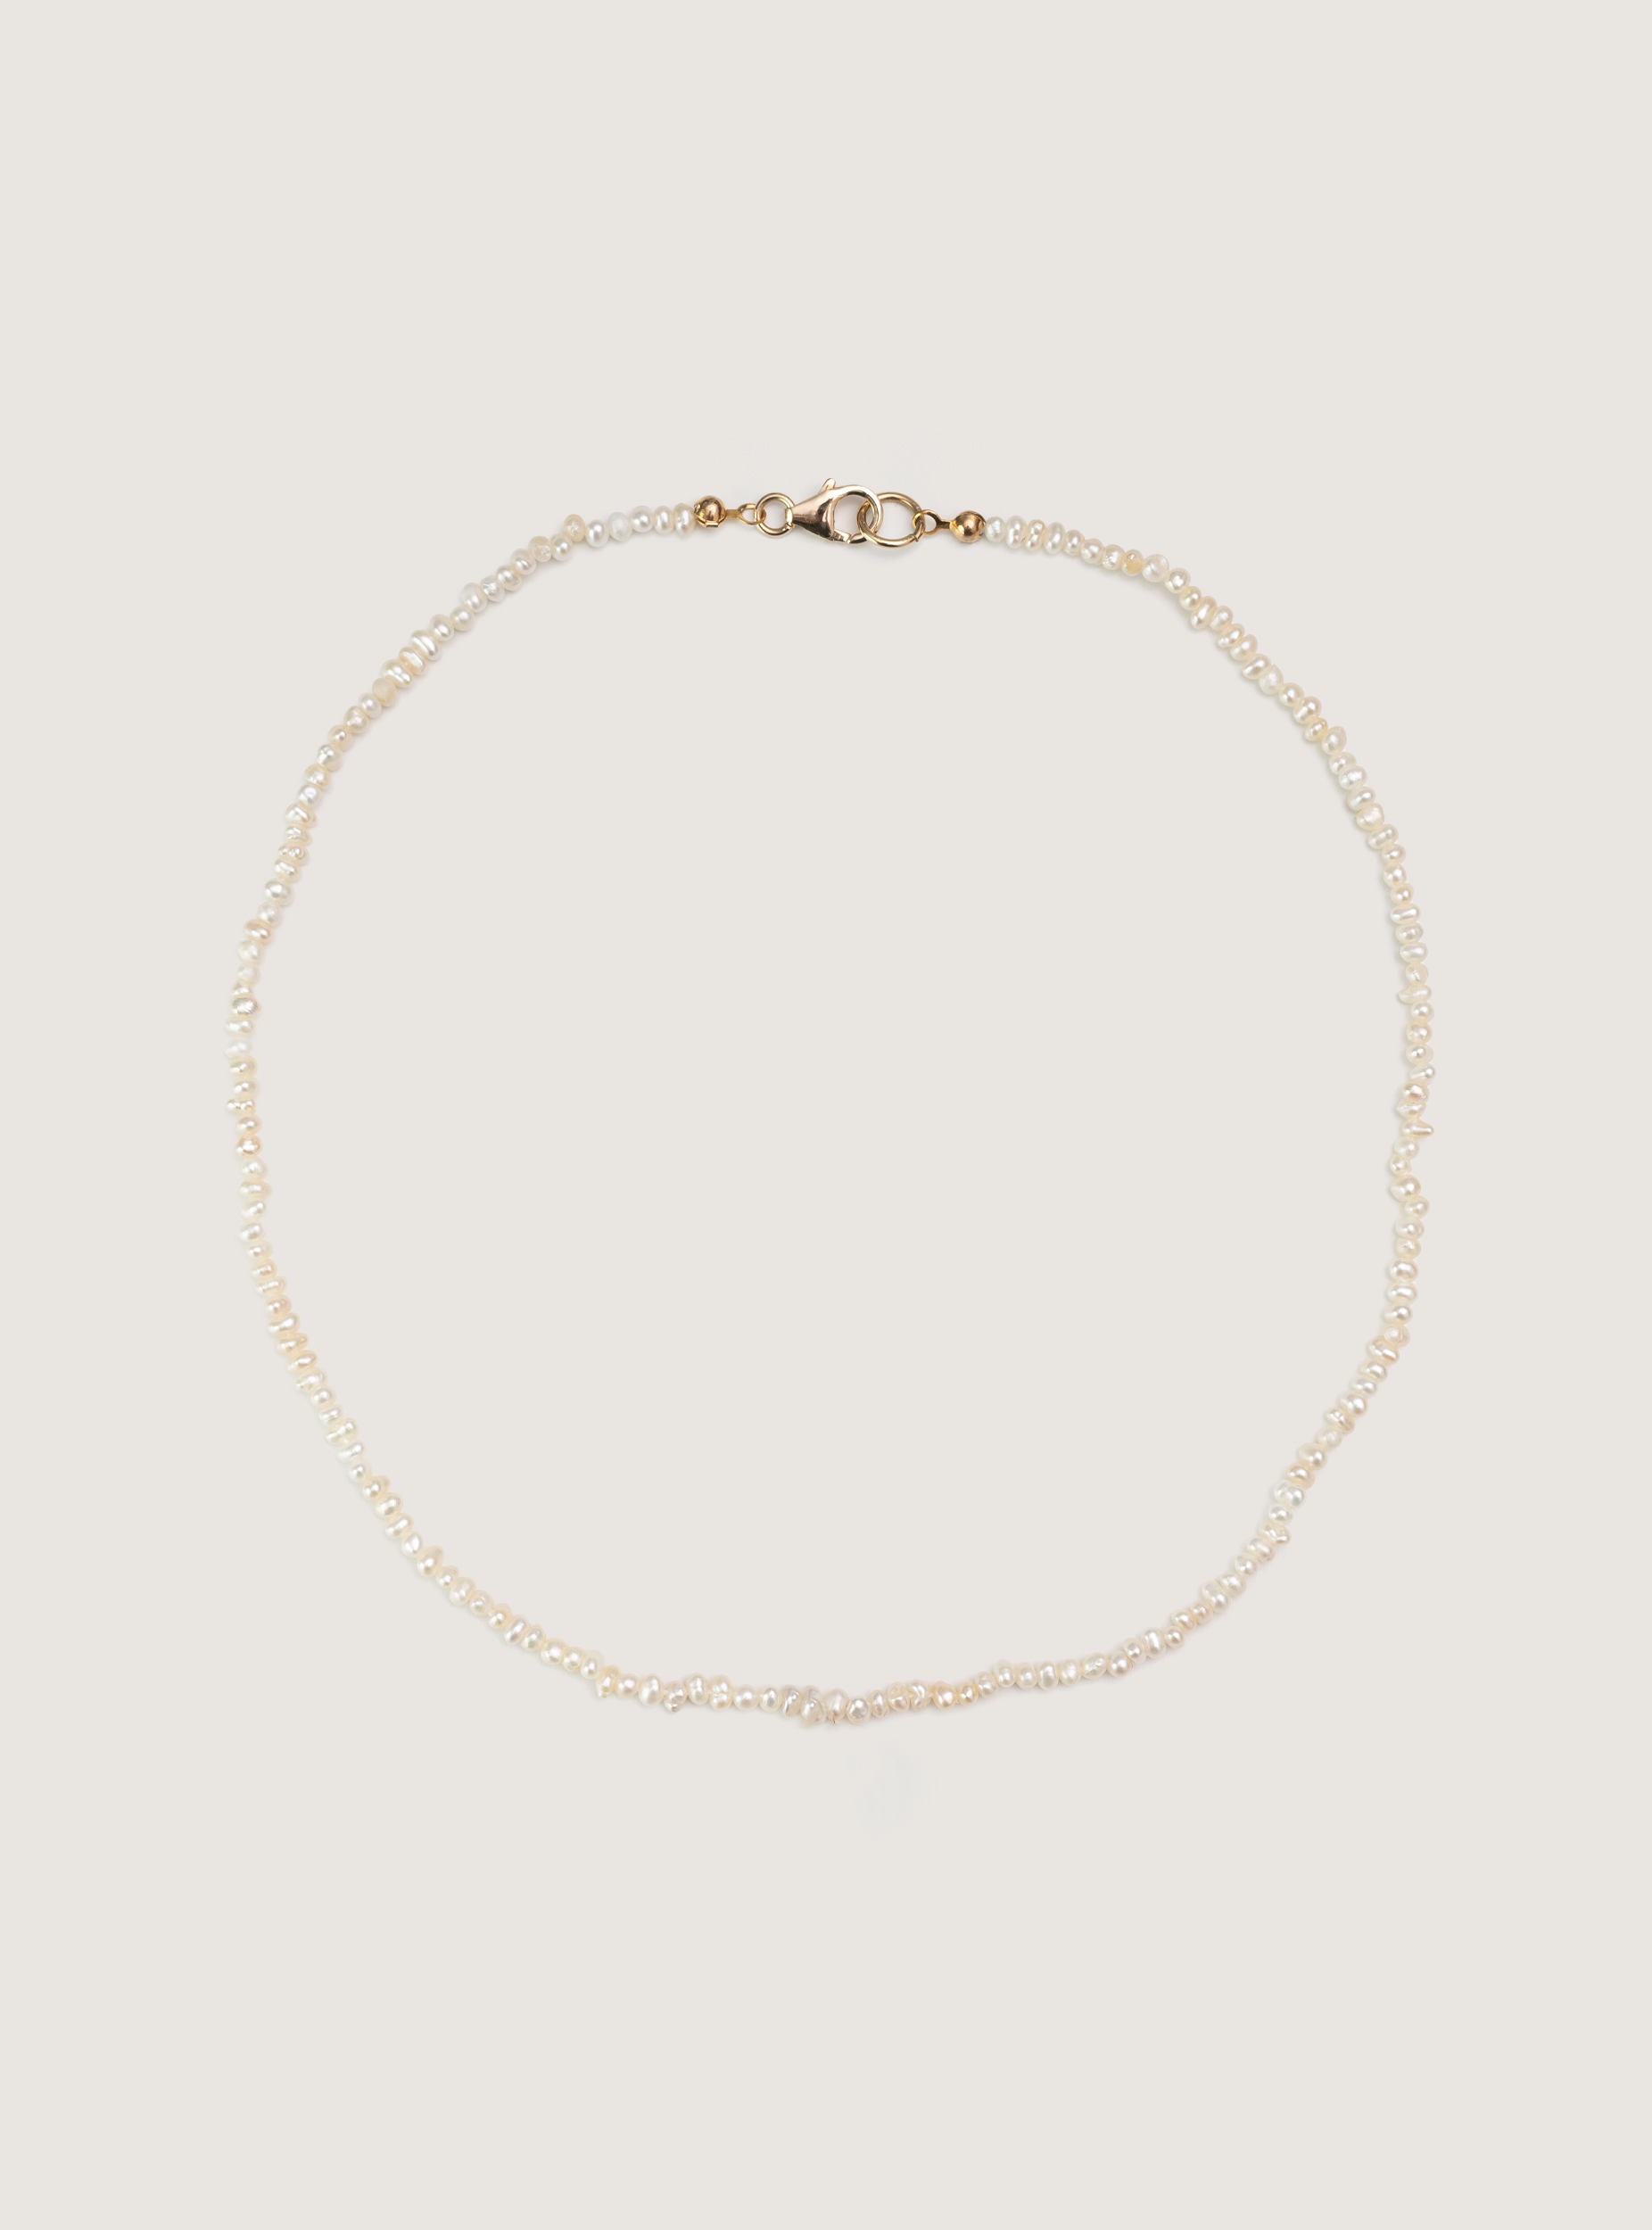 LOUISE | CHOKER NECKLACE